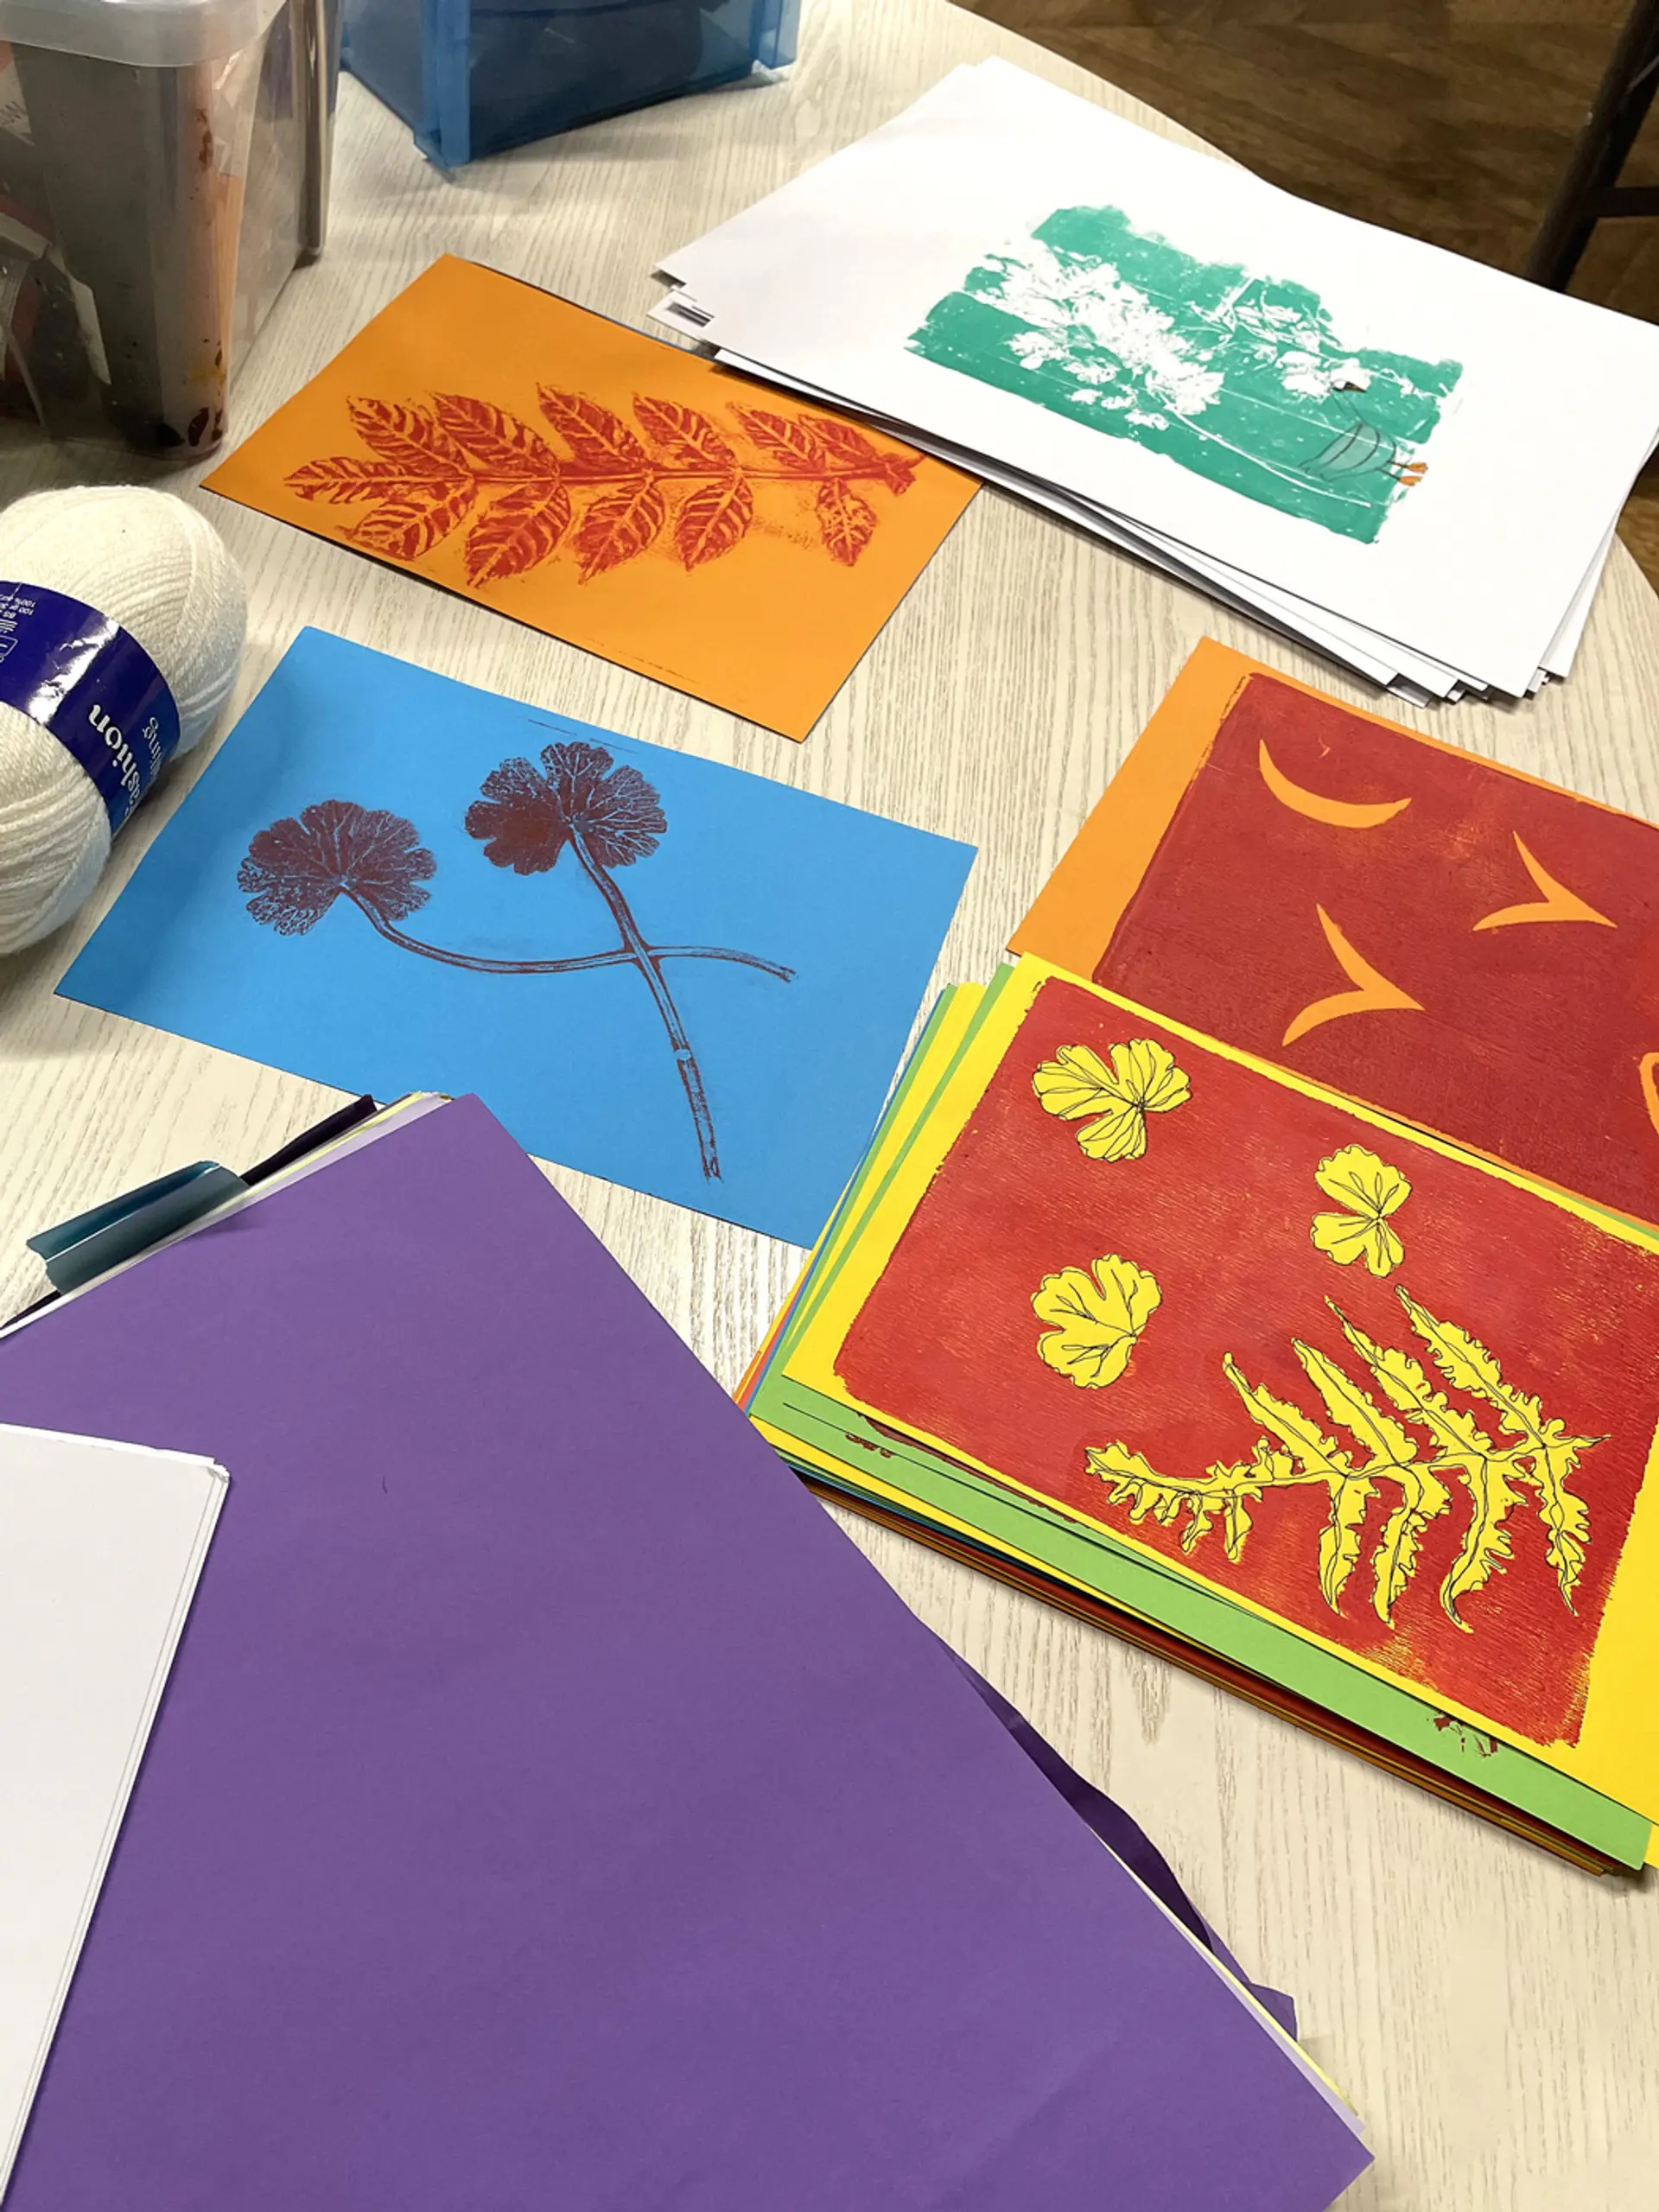 5 pieces of artwork created by printing leaves with ink and displayed on coloured paper on a table top.